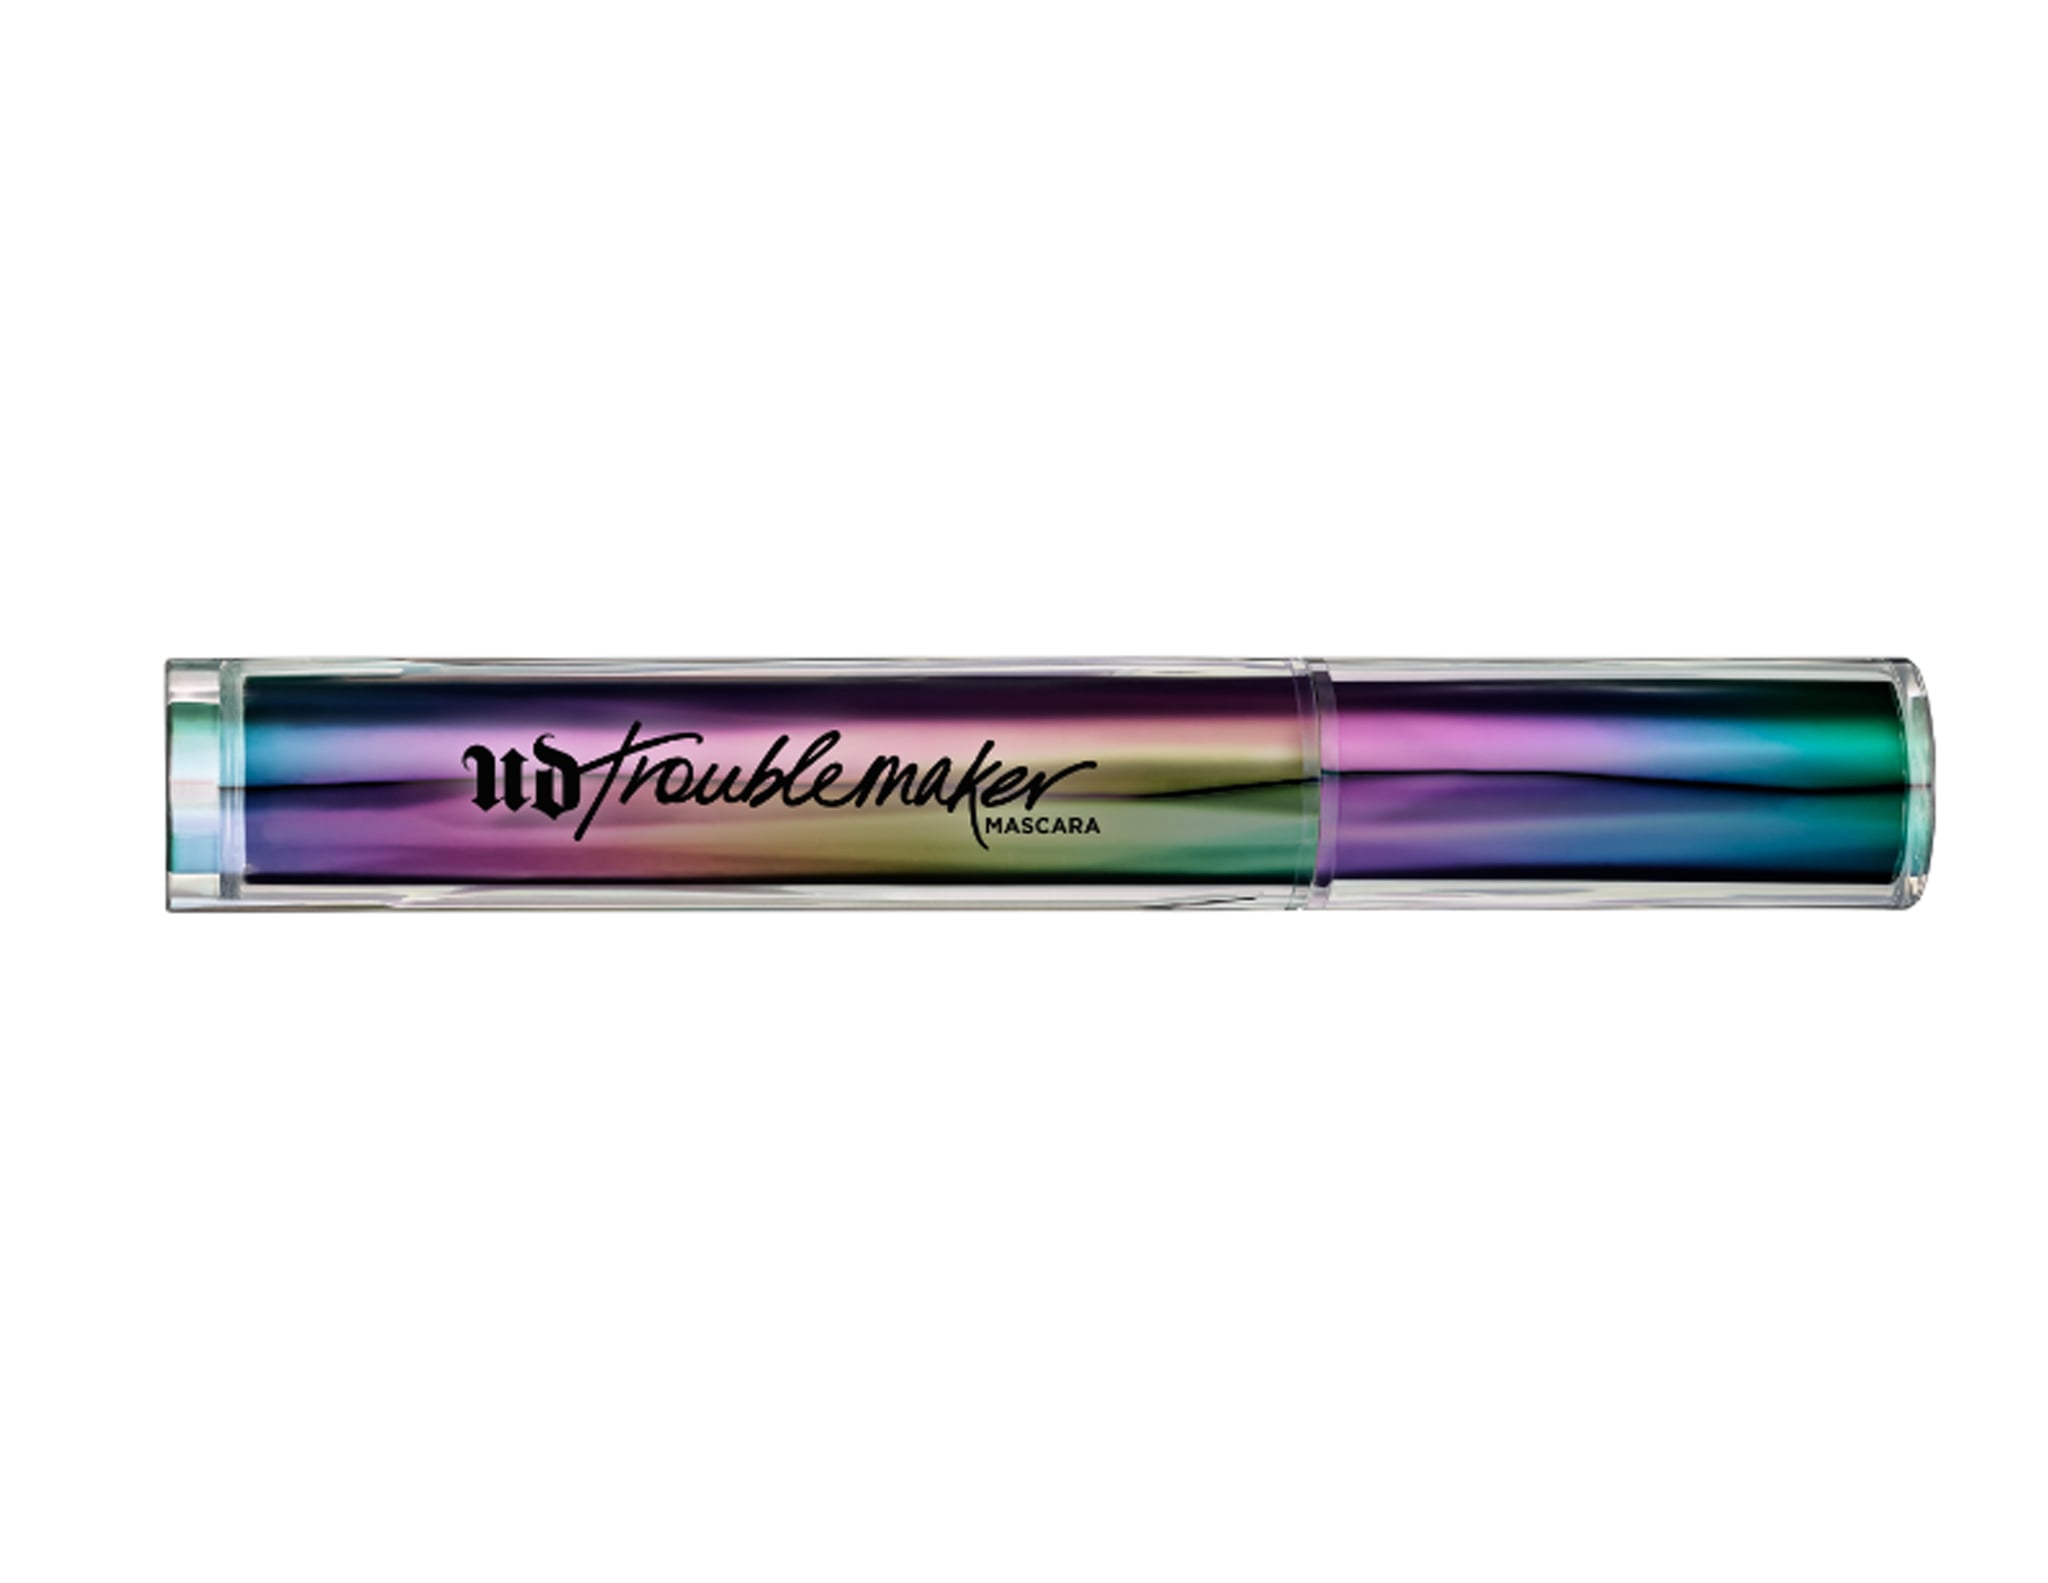 Of course, Urban Decay's Troublemaker Mascara, which comes in packagin...